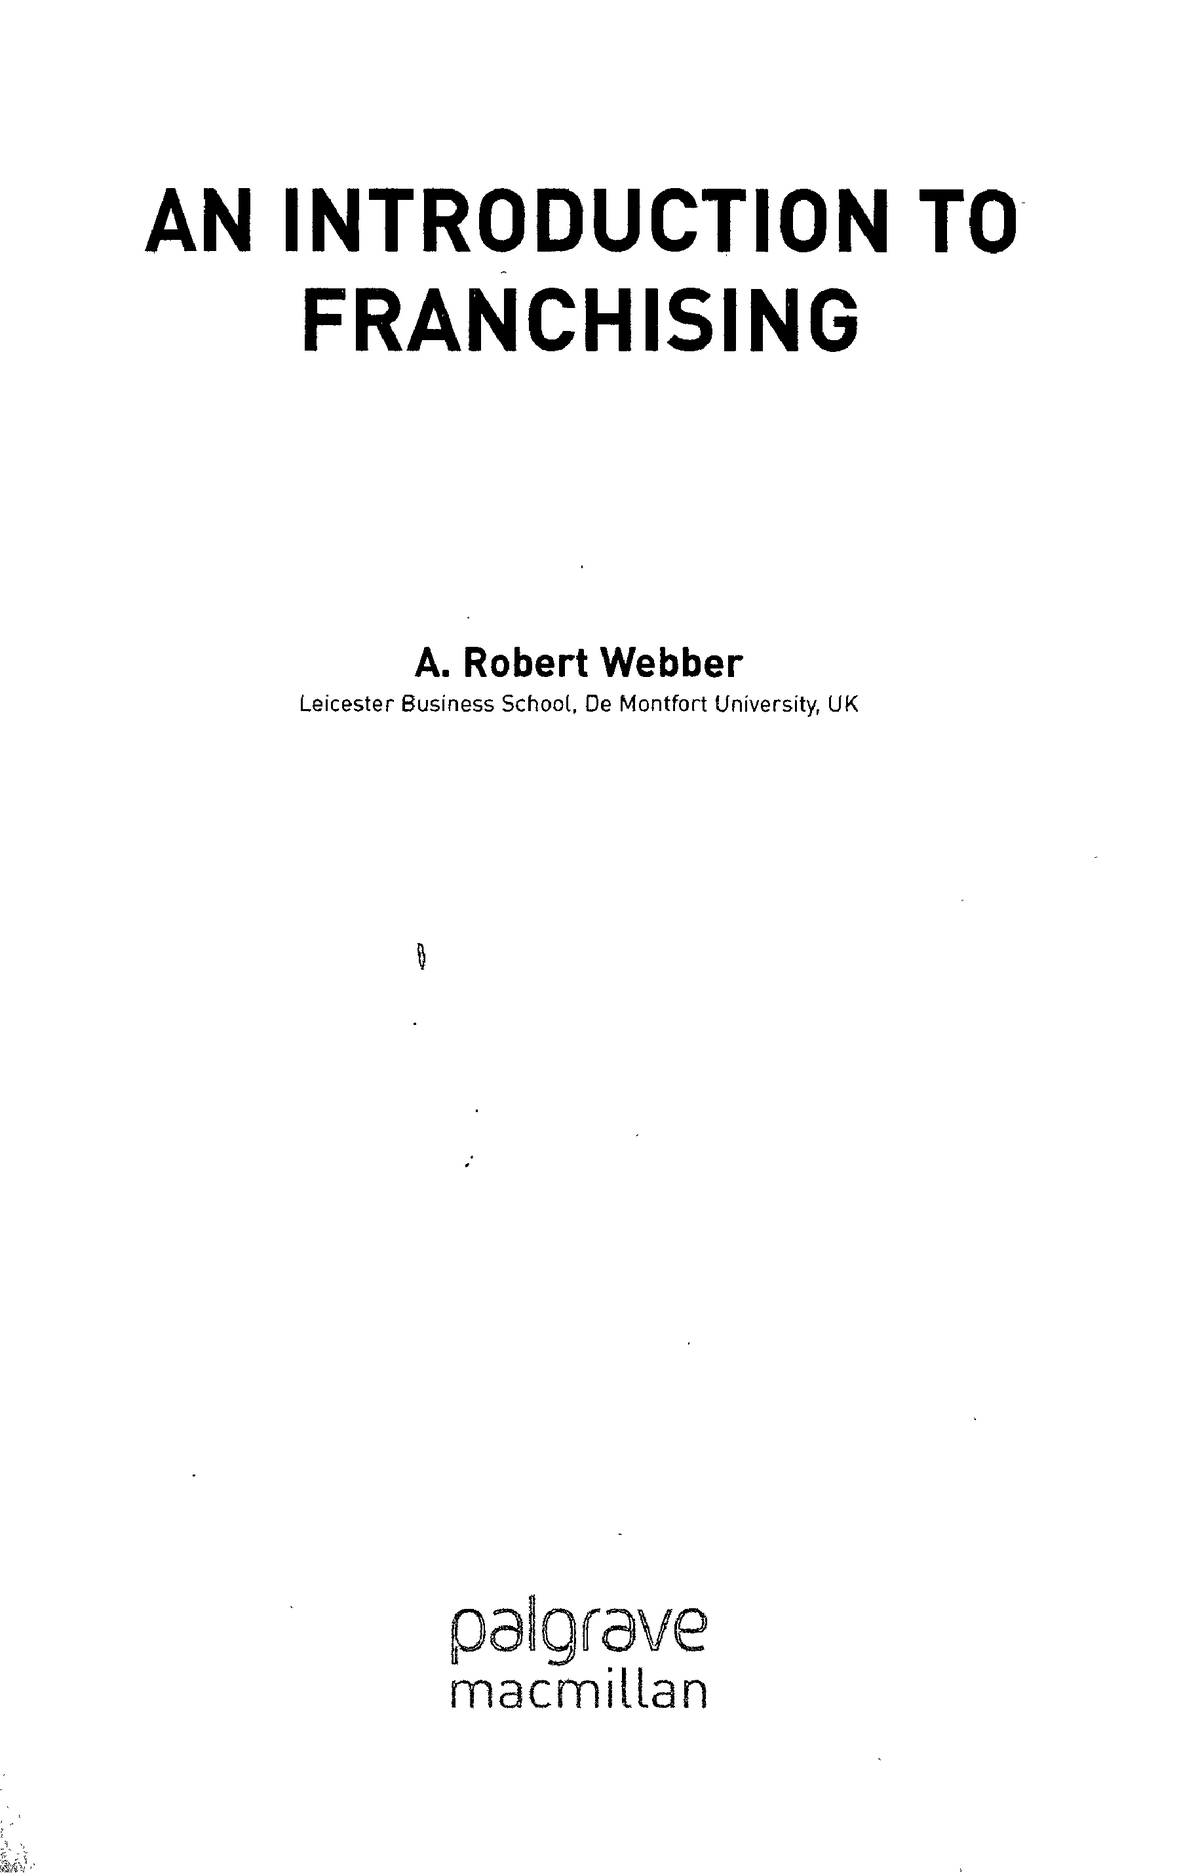 an introduction to franchising robert webber pdf